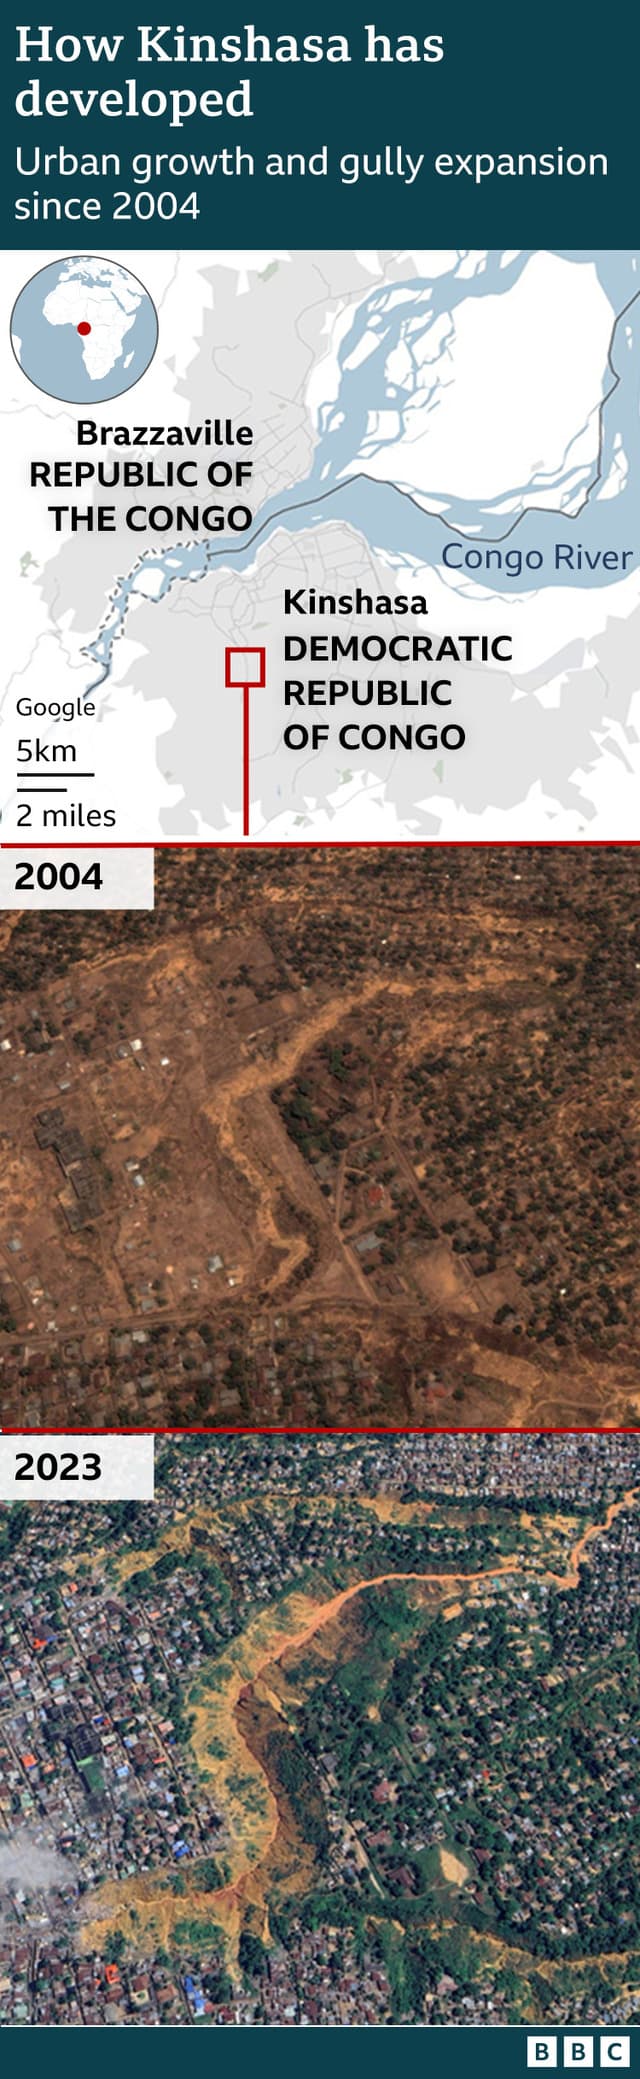 Kinshasa locator and a satelite image of 2004 and 2023